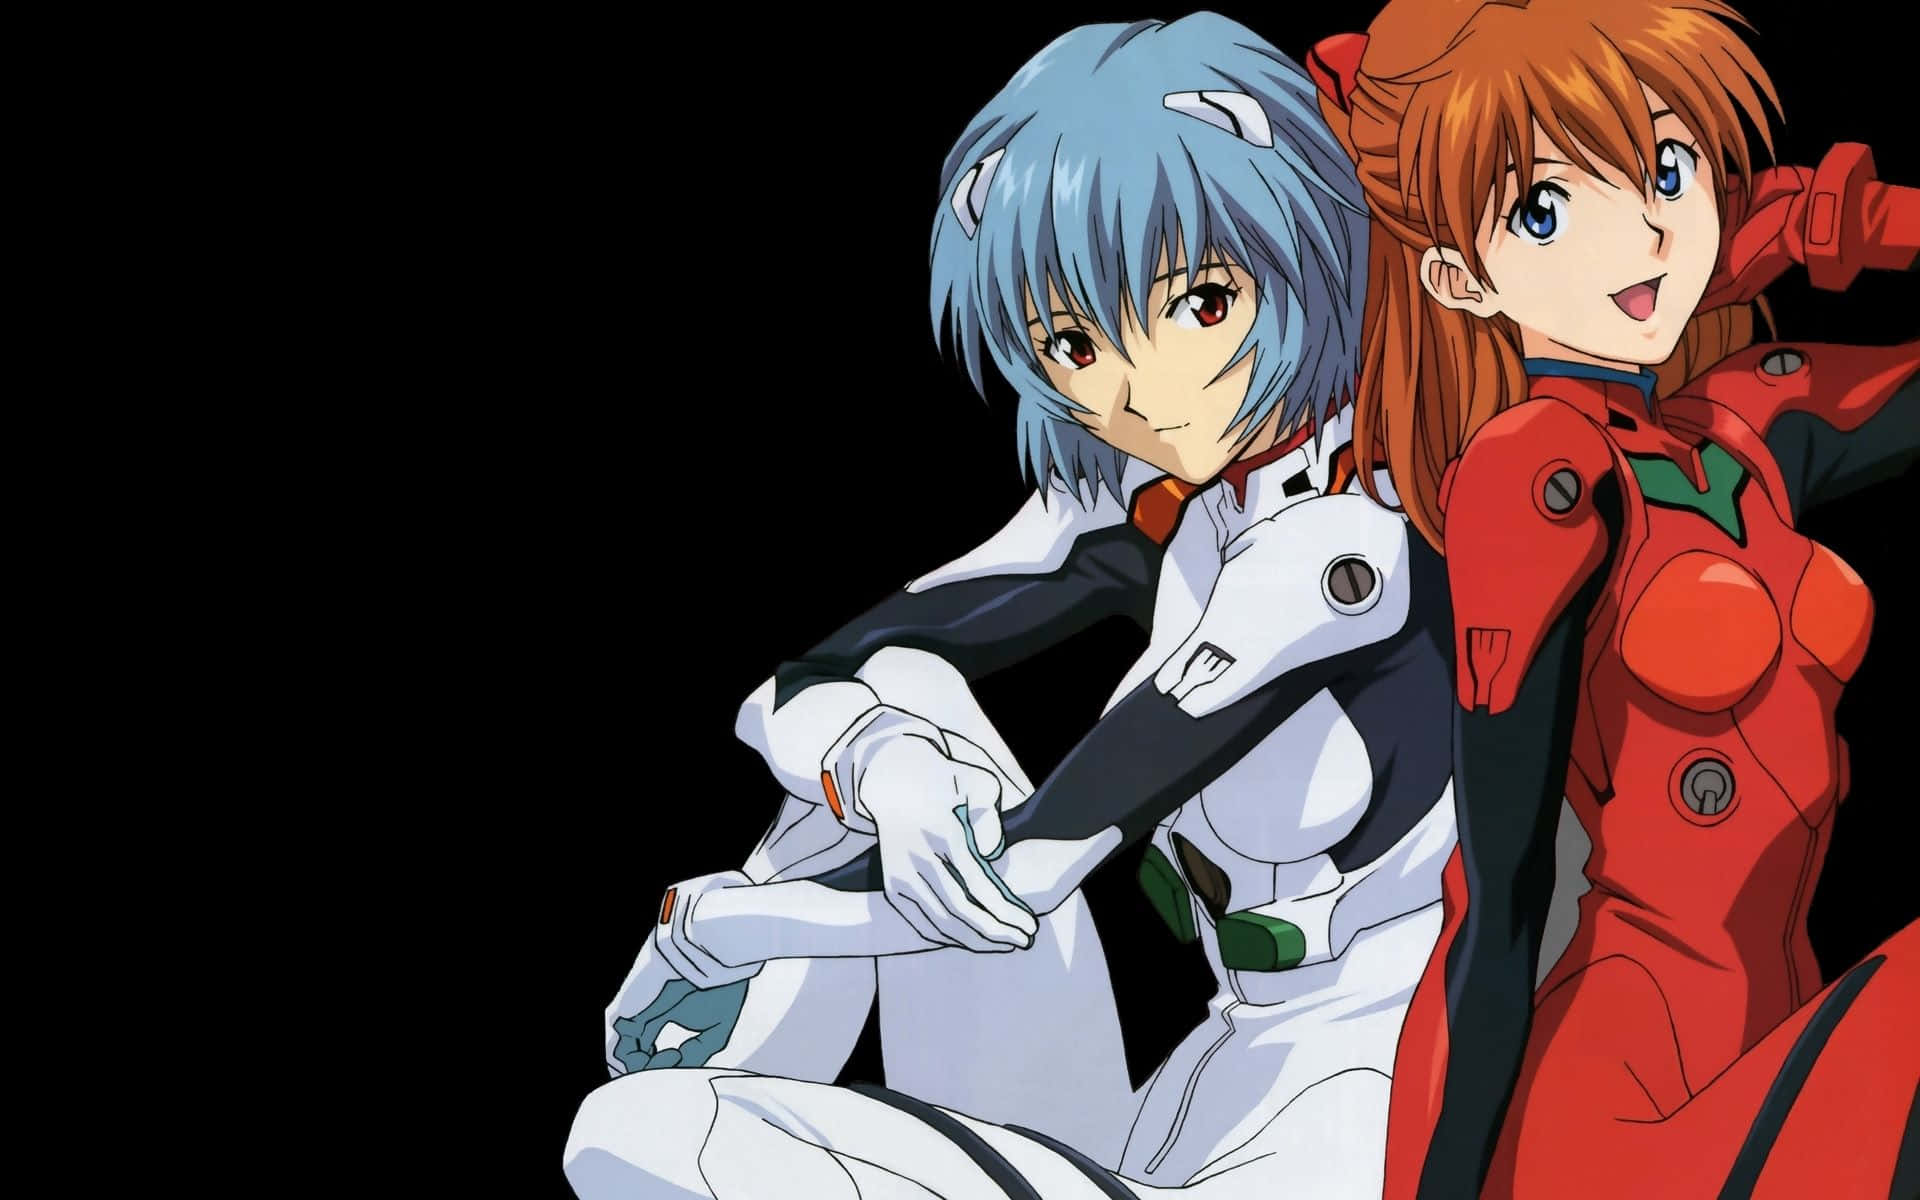 Intriguing Rei Ayanami In A Mysterious Scene